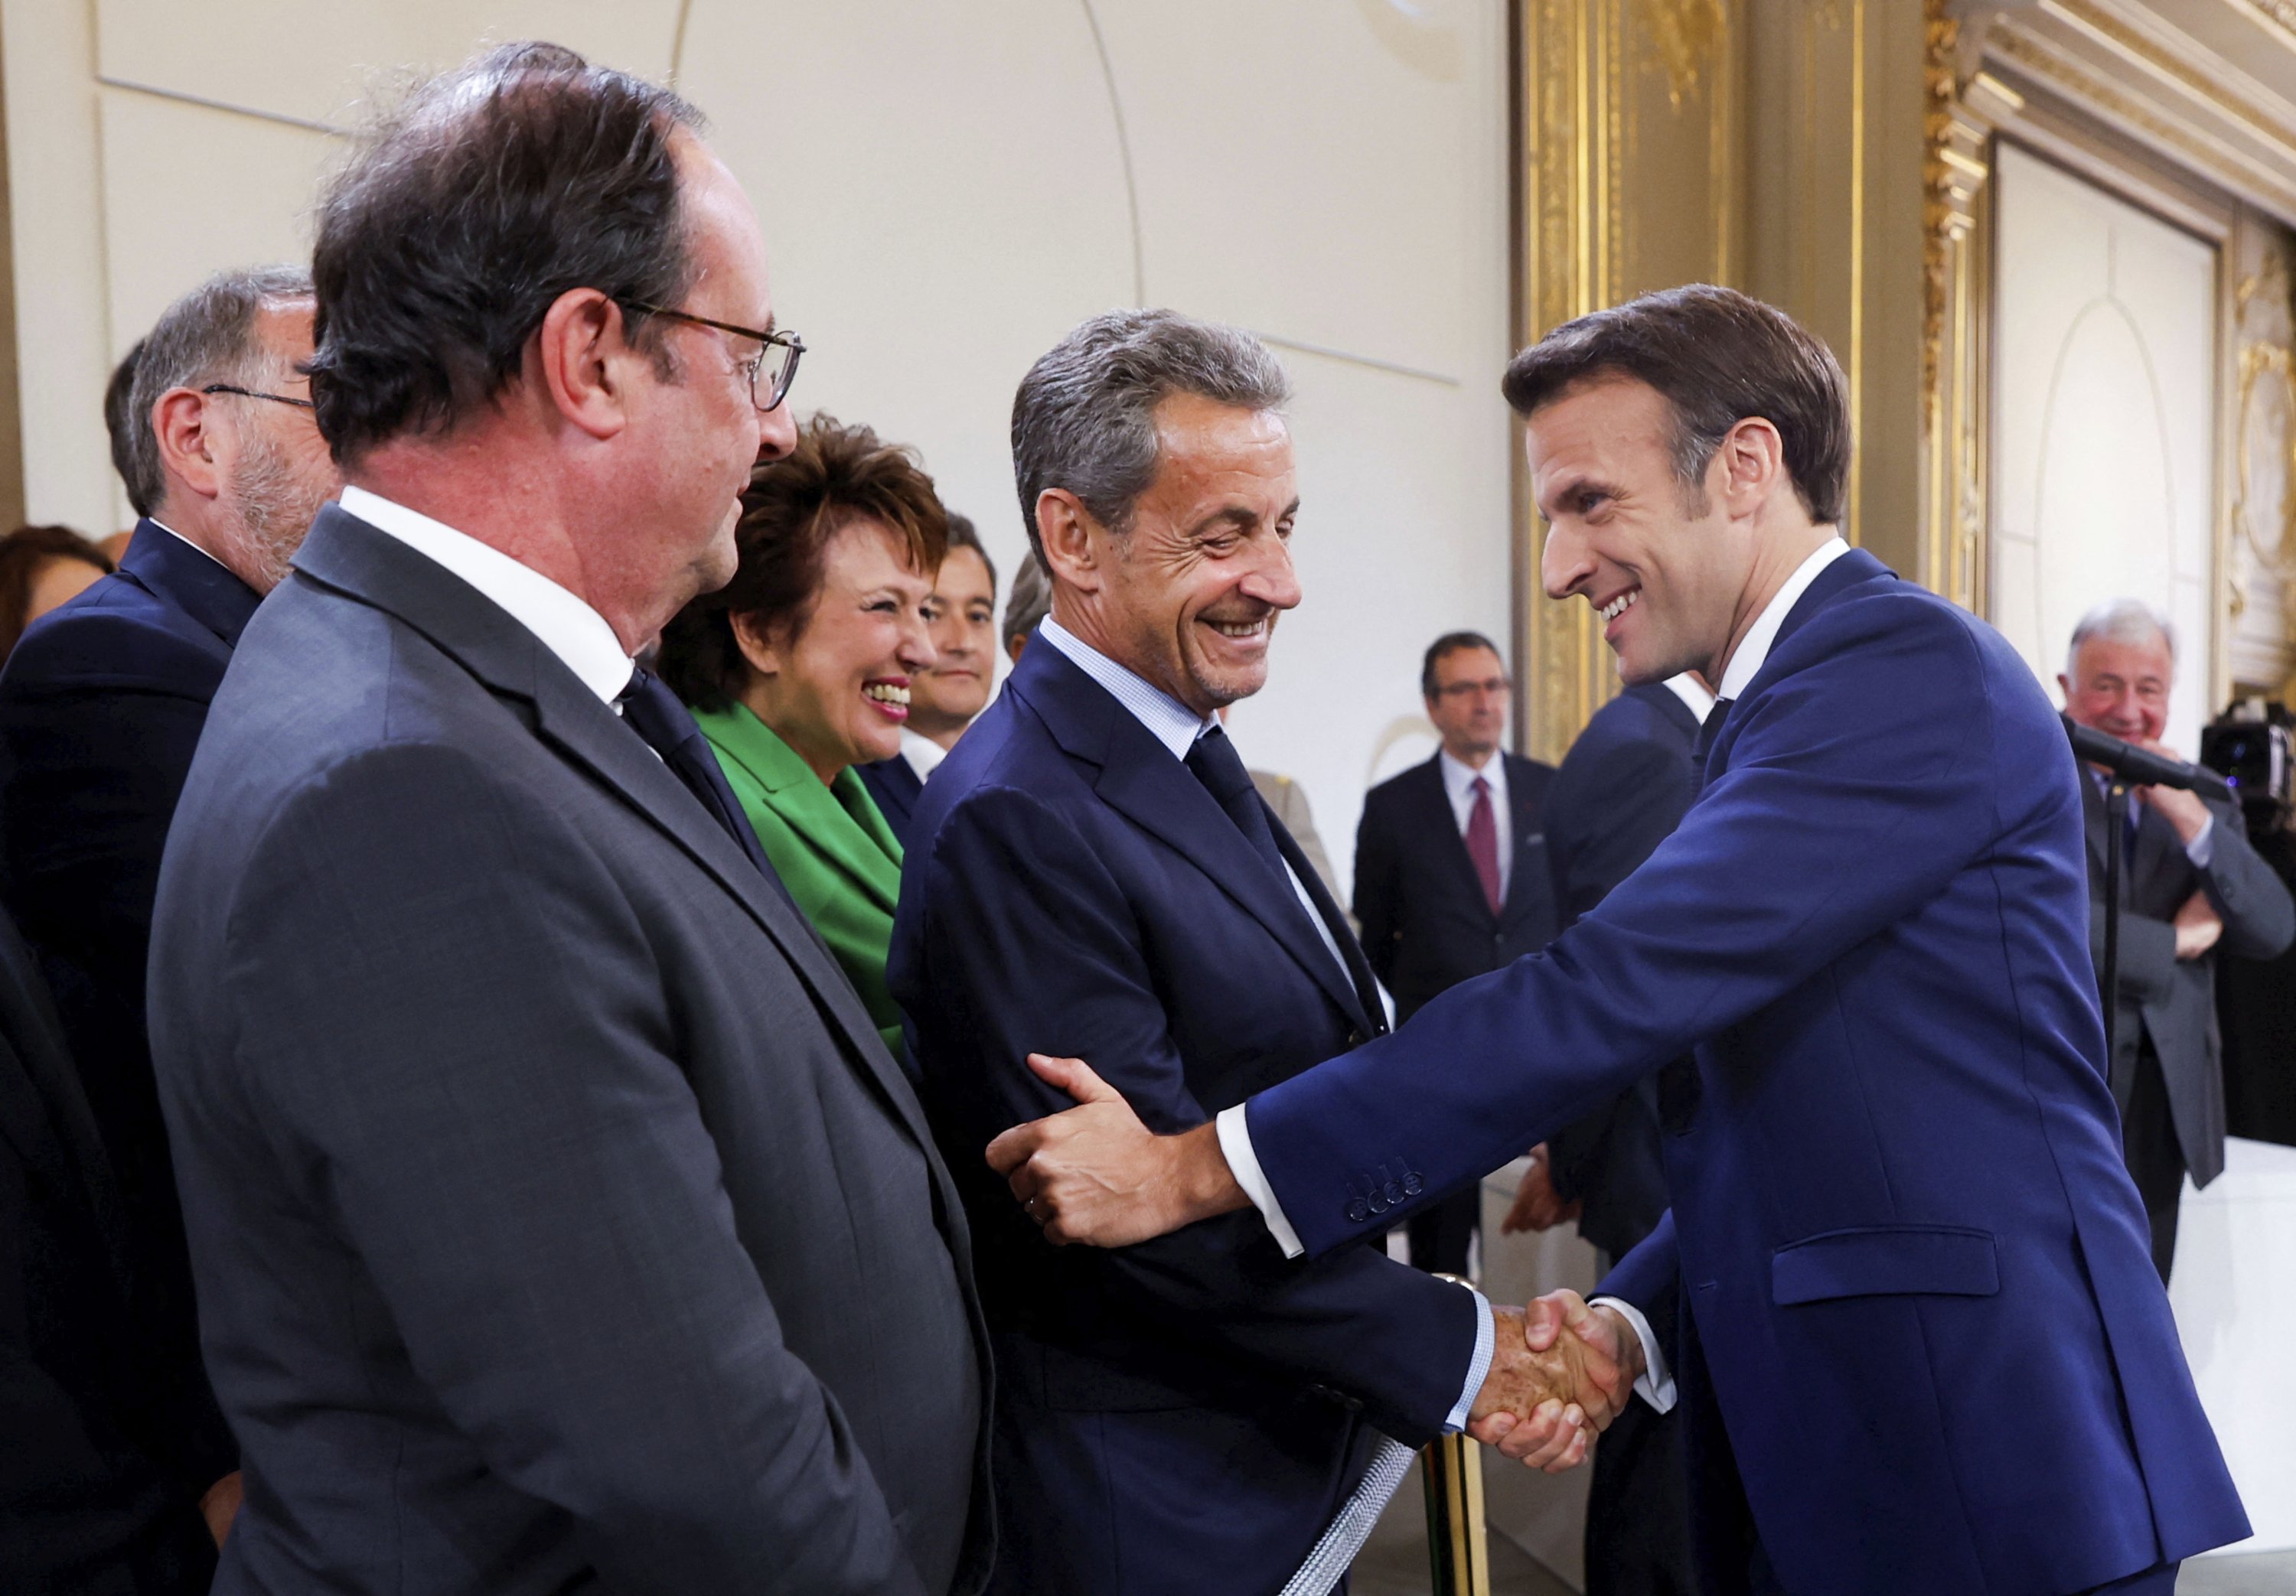 France's former President Francois Hollande (L) looks on as France's former President Nicolas Sarkozy (C) shakes hands with French President Emmanuel Macron during the ceremony of his inauguration for a second term at the Elysee palace, in Paris, France, May 7, 2022. (AP Photo)